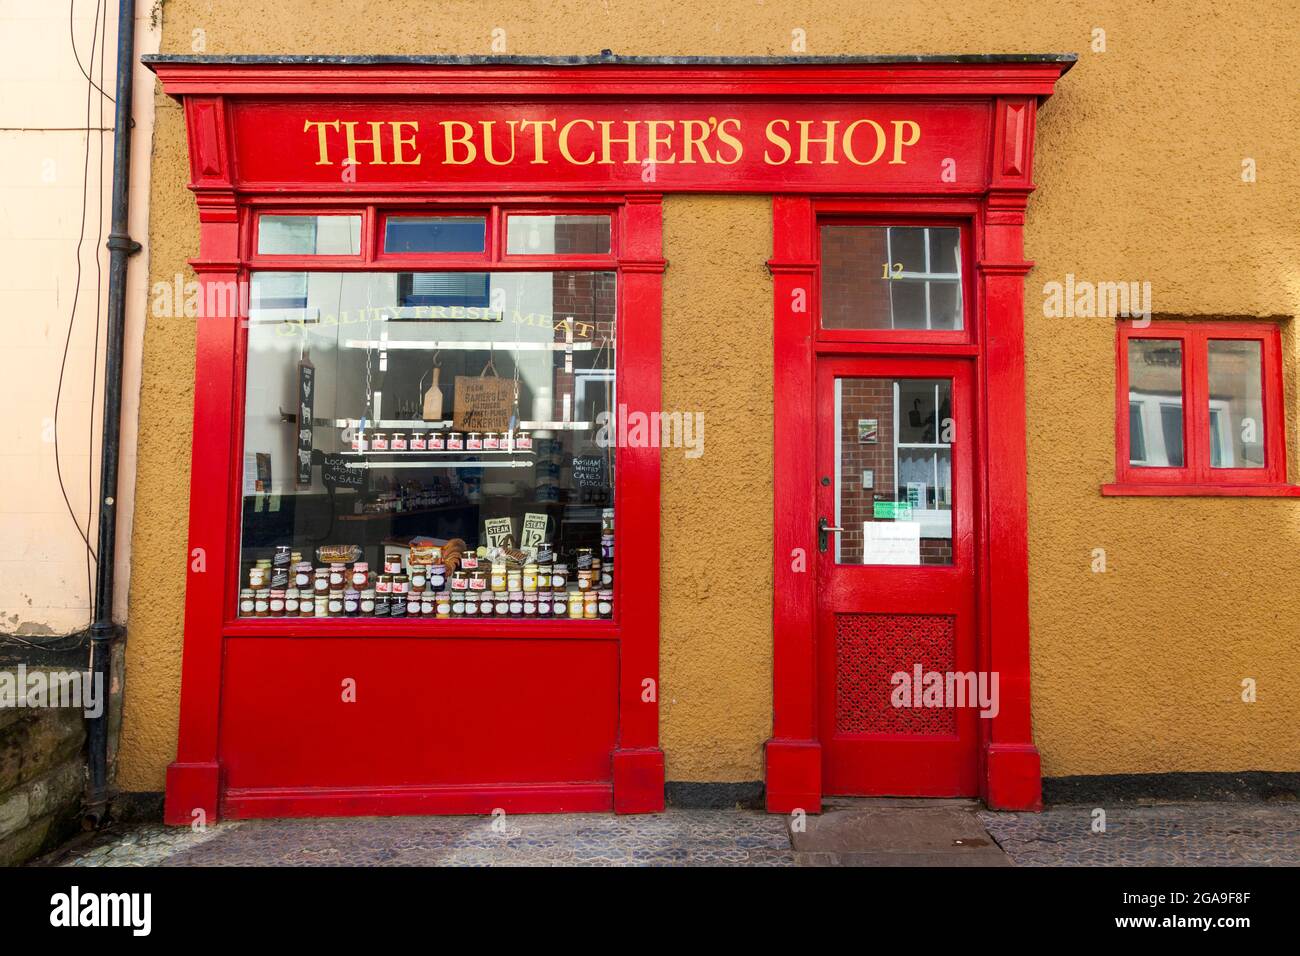 The Butcher's Shop in the village of Staithes, North Yorkshire, England, U.K. Stock Photo